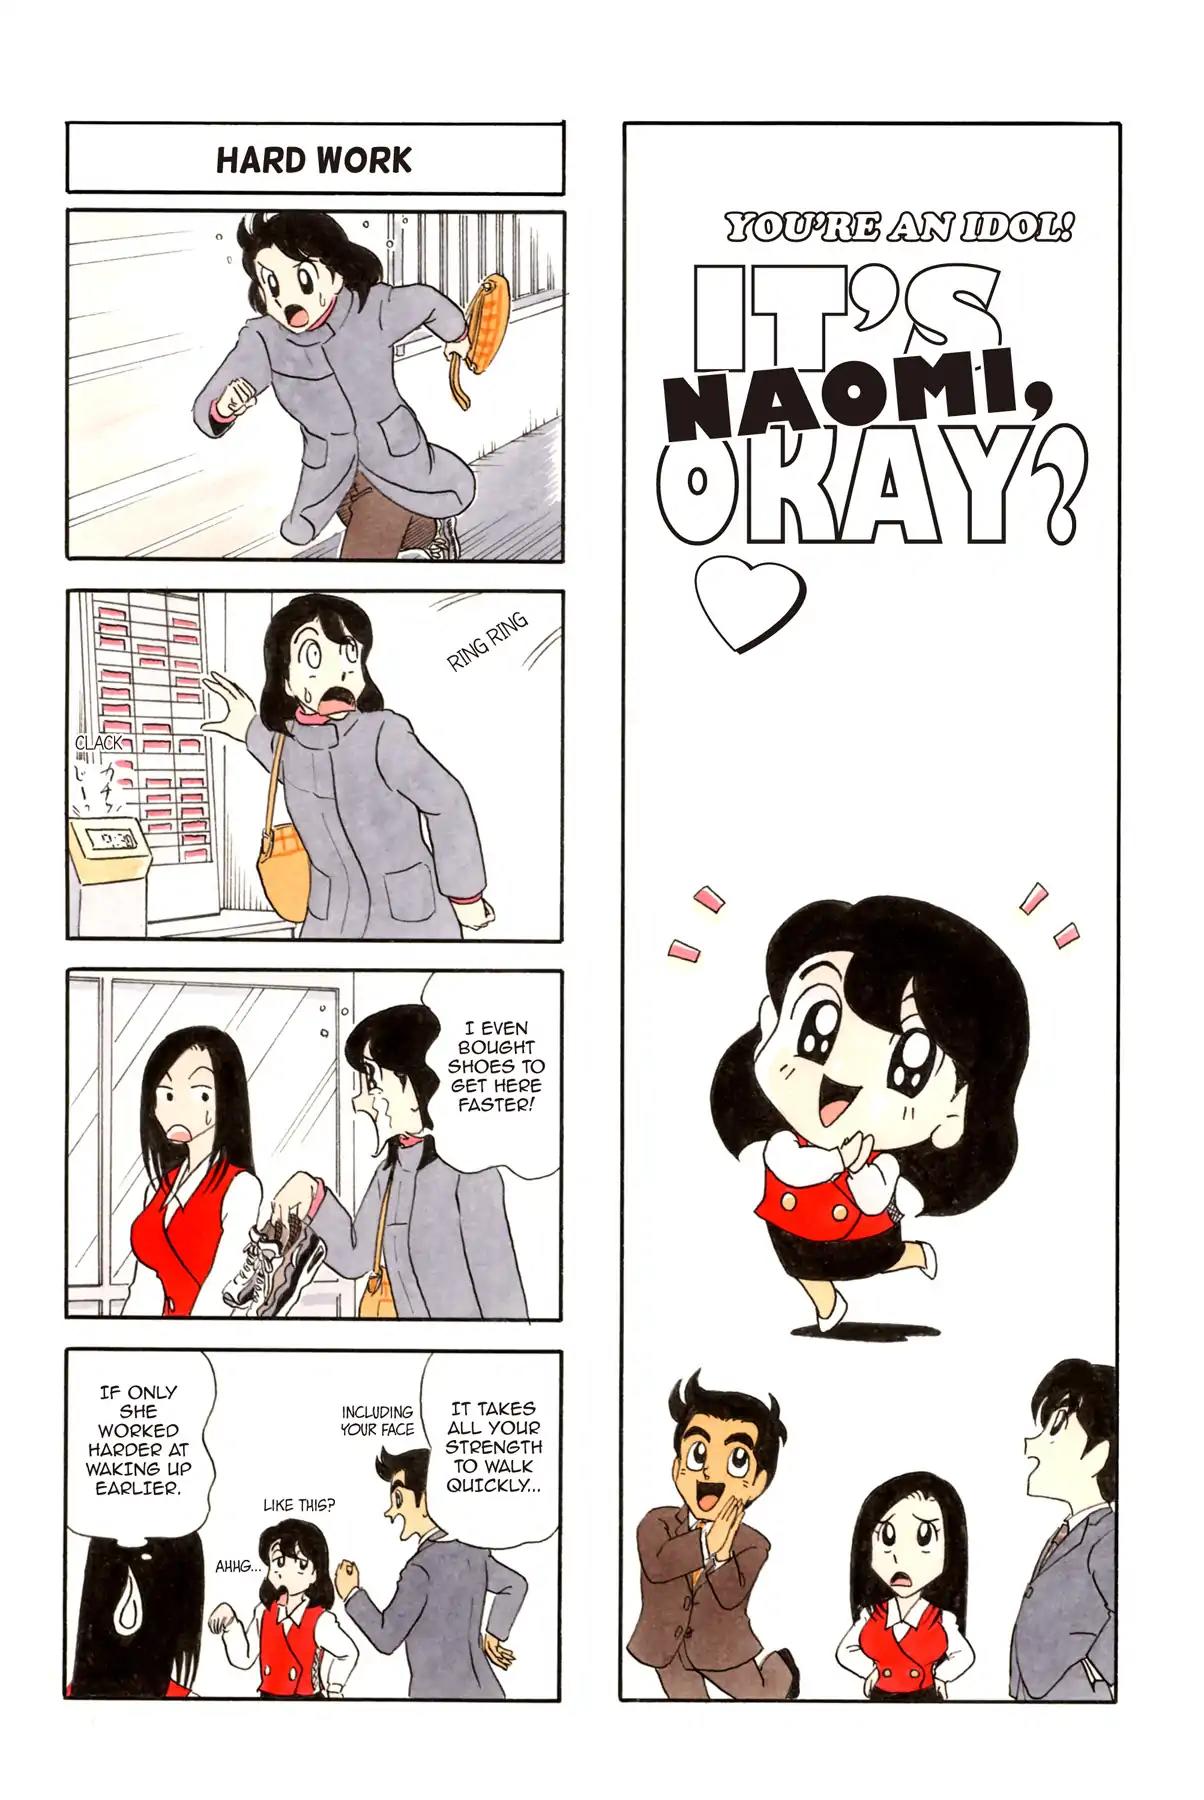 It's Naomi, Okay? After 16 Vol 1 Chapter 6